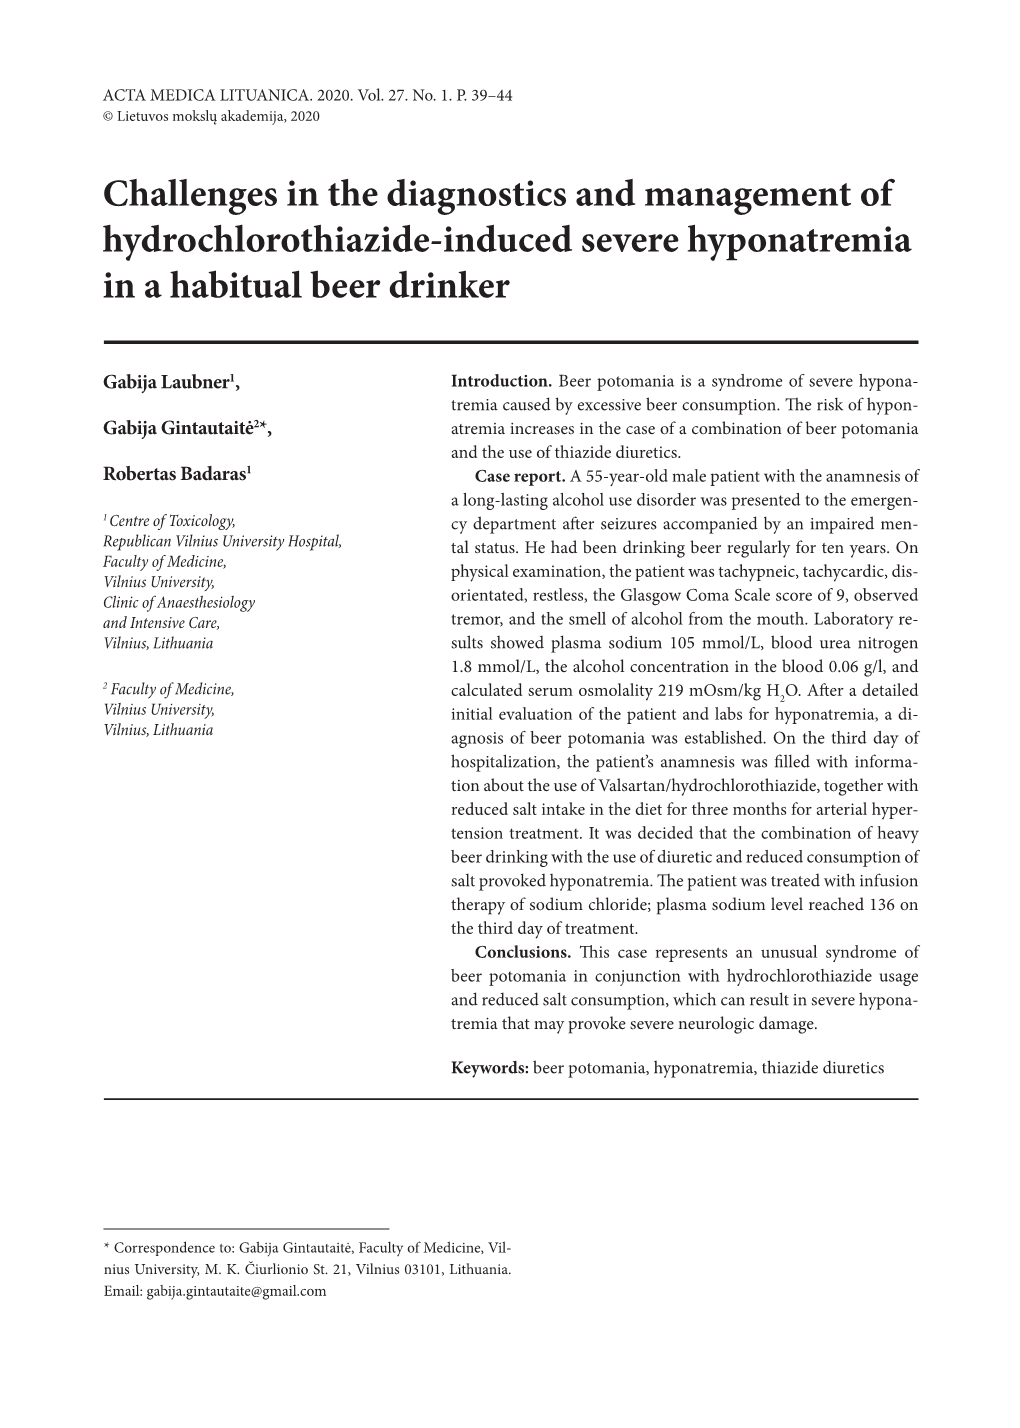 Challenges in the Diagnostics and Management of Hydrochlorothiazide-Induced Severe Hyponatremia in a Habitual Beer Drinker